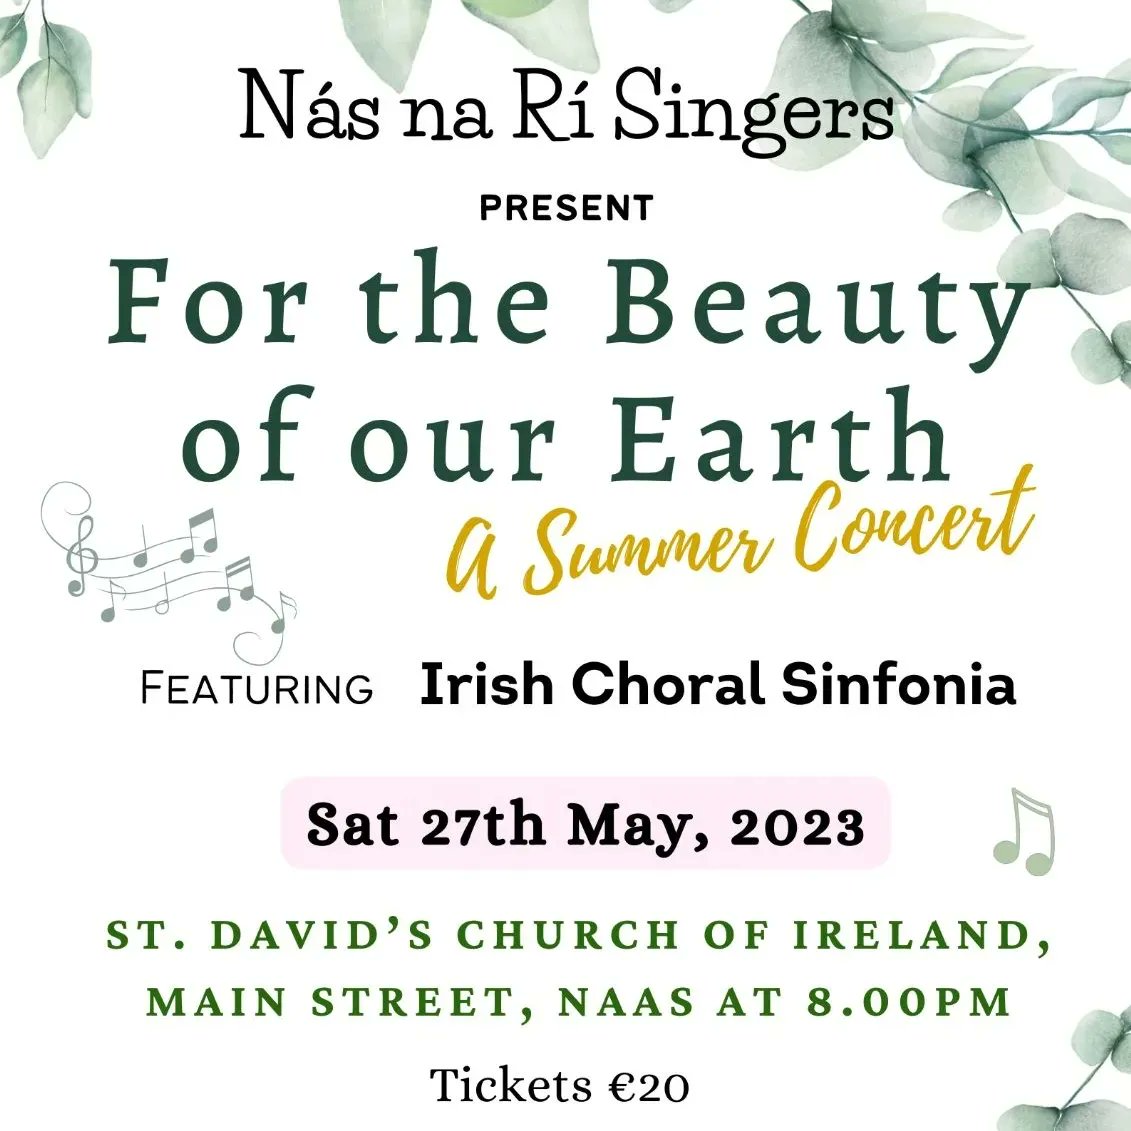 Only 10 more days until our Summer Concert! Do you have your tickets yet?

If not, you better act fast and get your tickets now through Eventbrite, a choir member or at Barker & Jones (Naas)! 

eventbrite.ie/e/for-the-beau…

#choir #NasNaRi #summerconcert #naasball #beautyofourearth